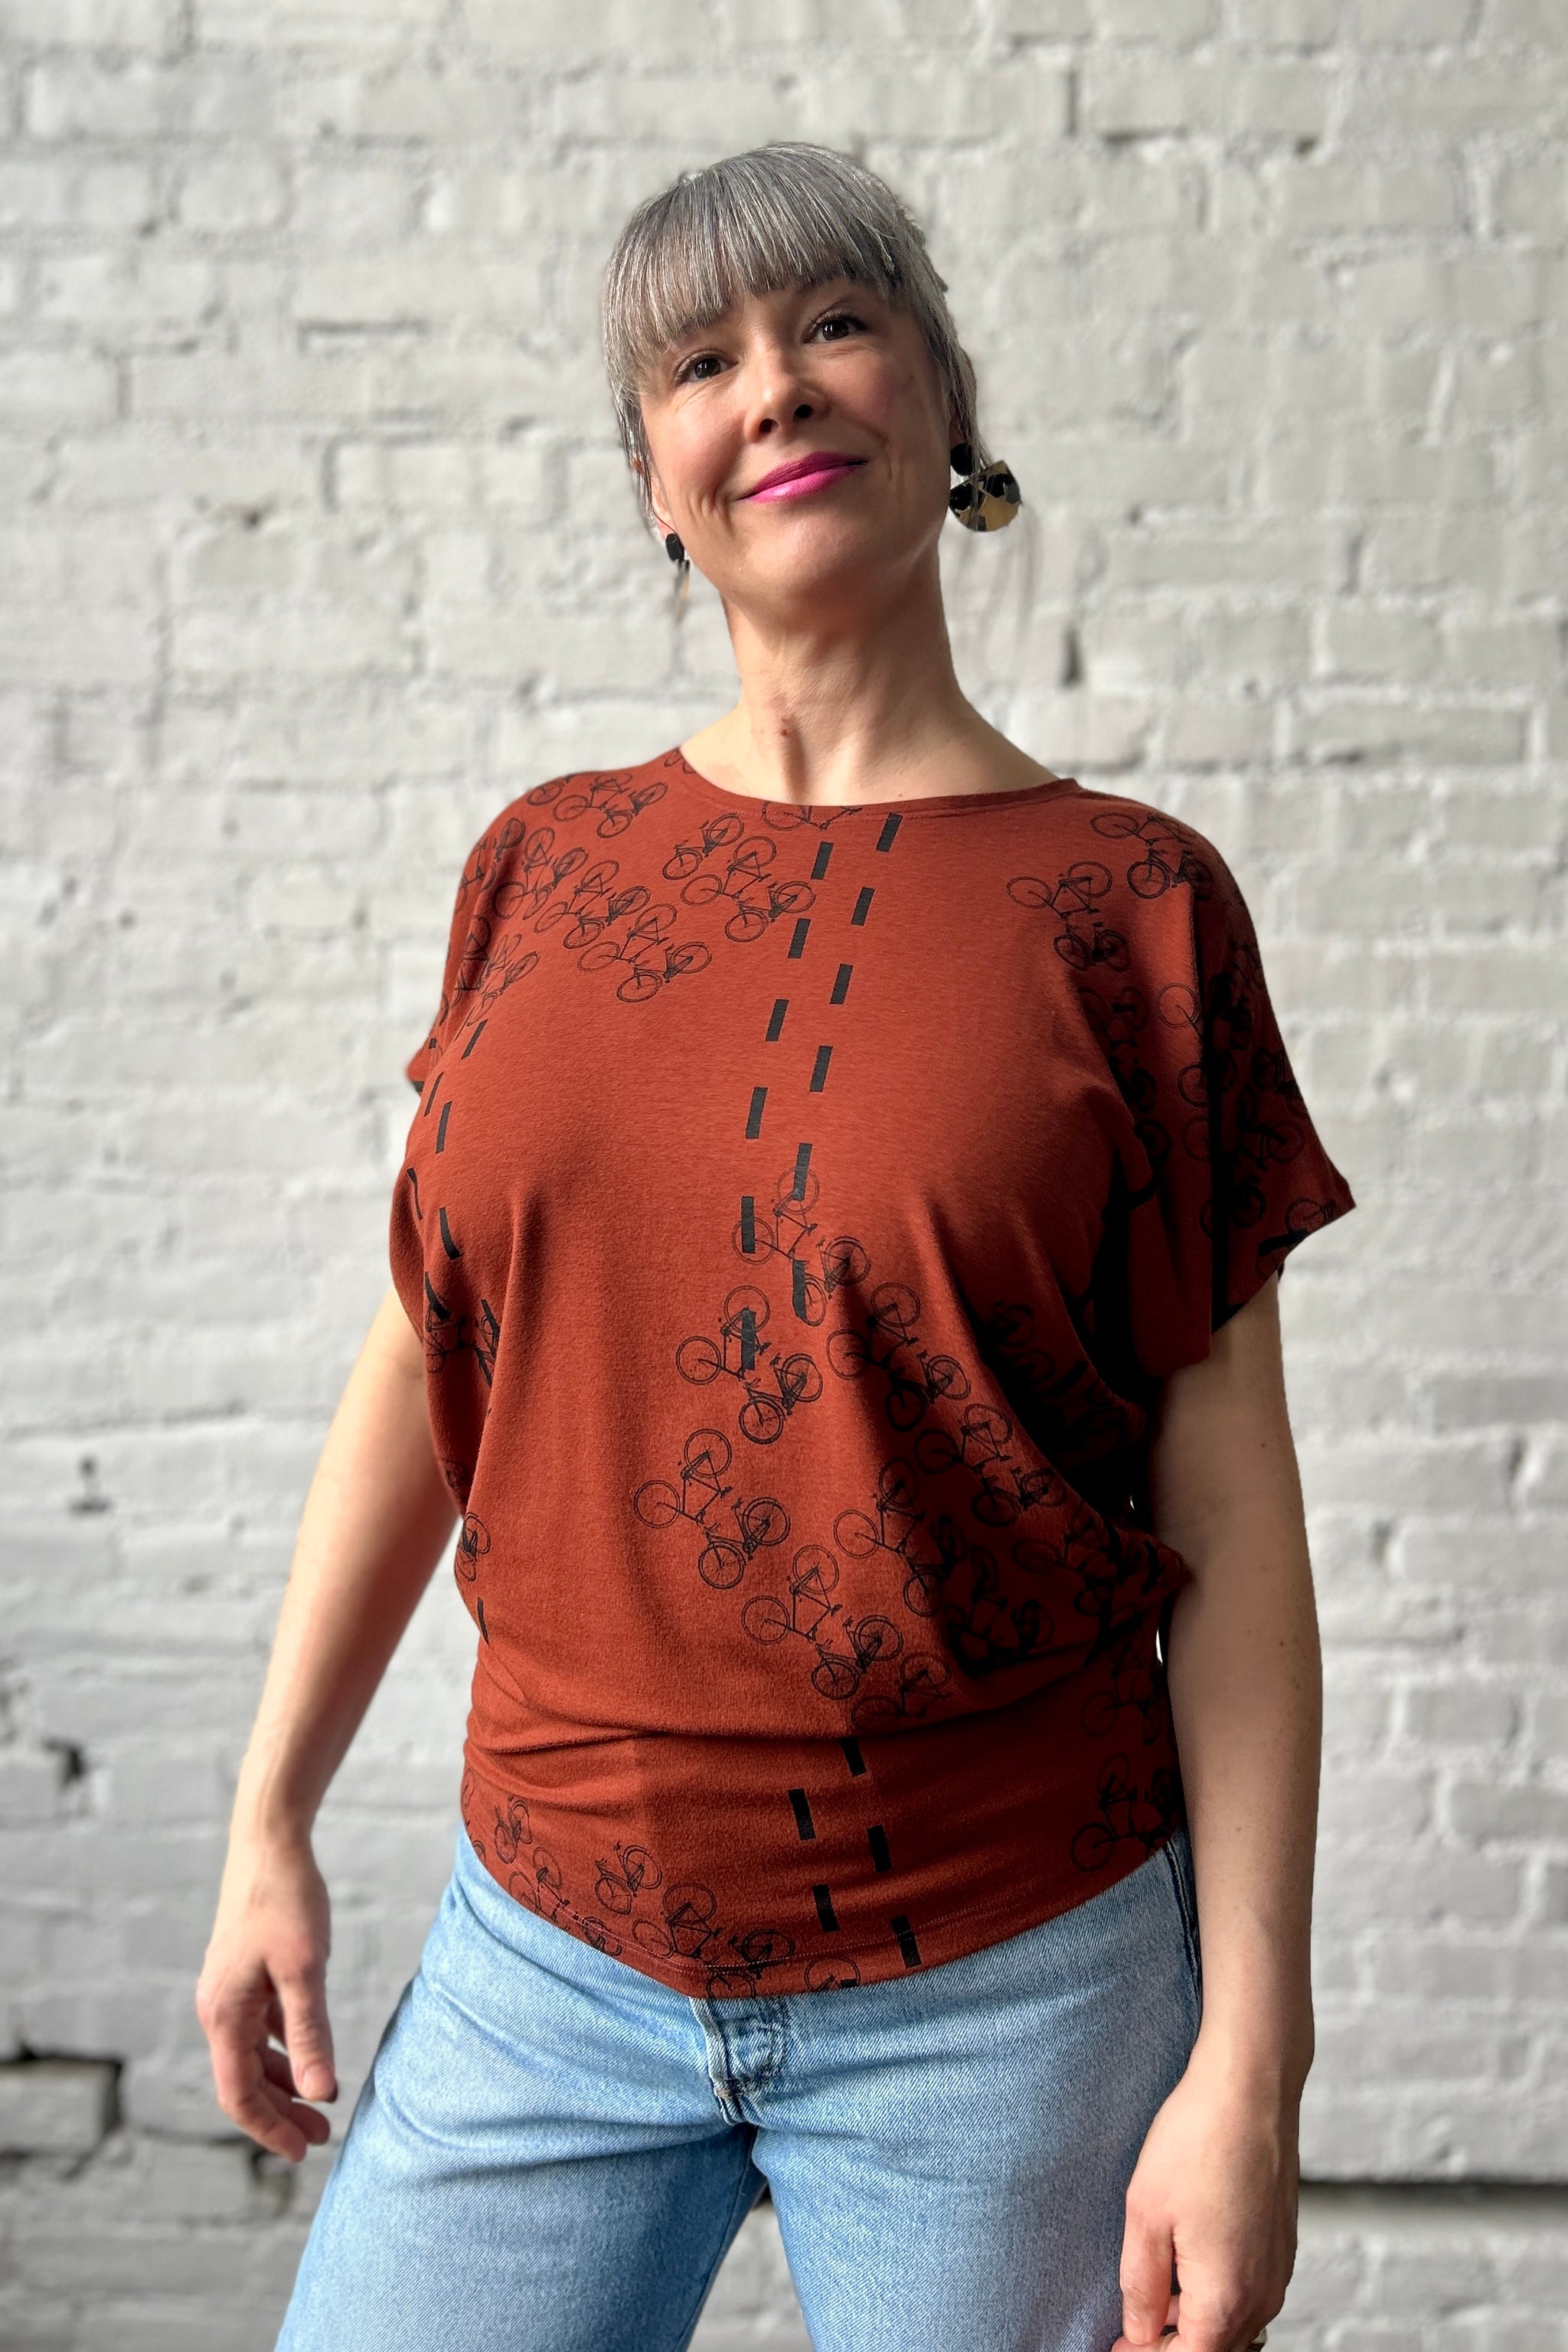 Woman wears a chestnut coloured drapey jersey-fabric short-sleevetop silkscreen-printed with black bicycles and paired with blue jeans.